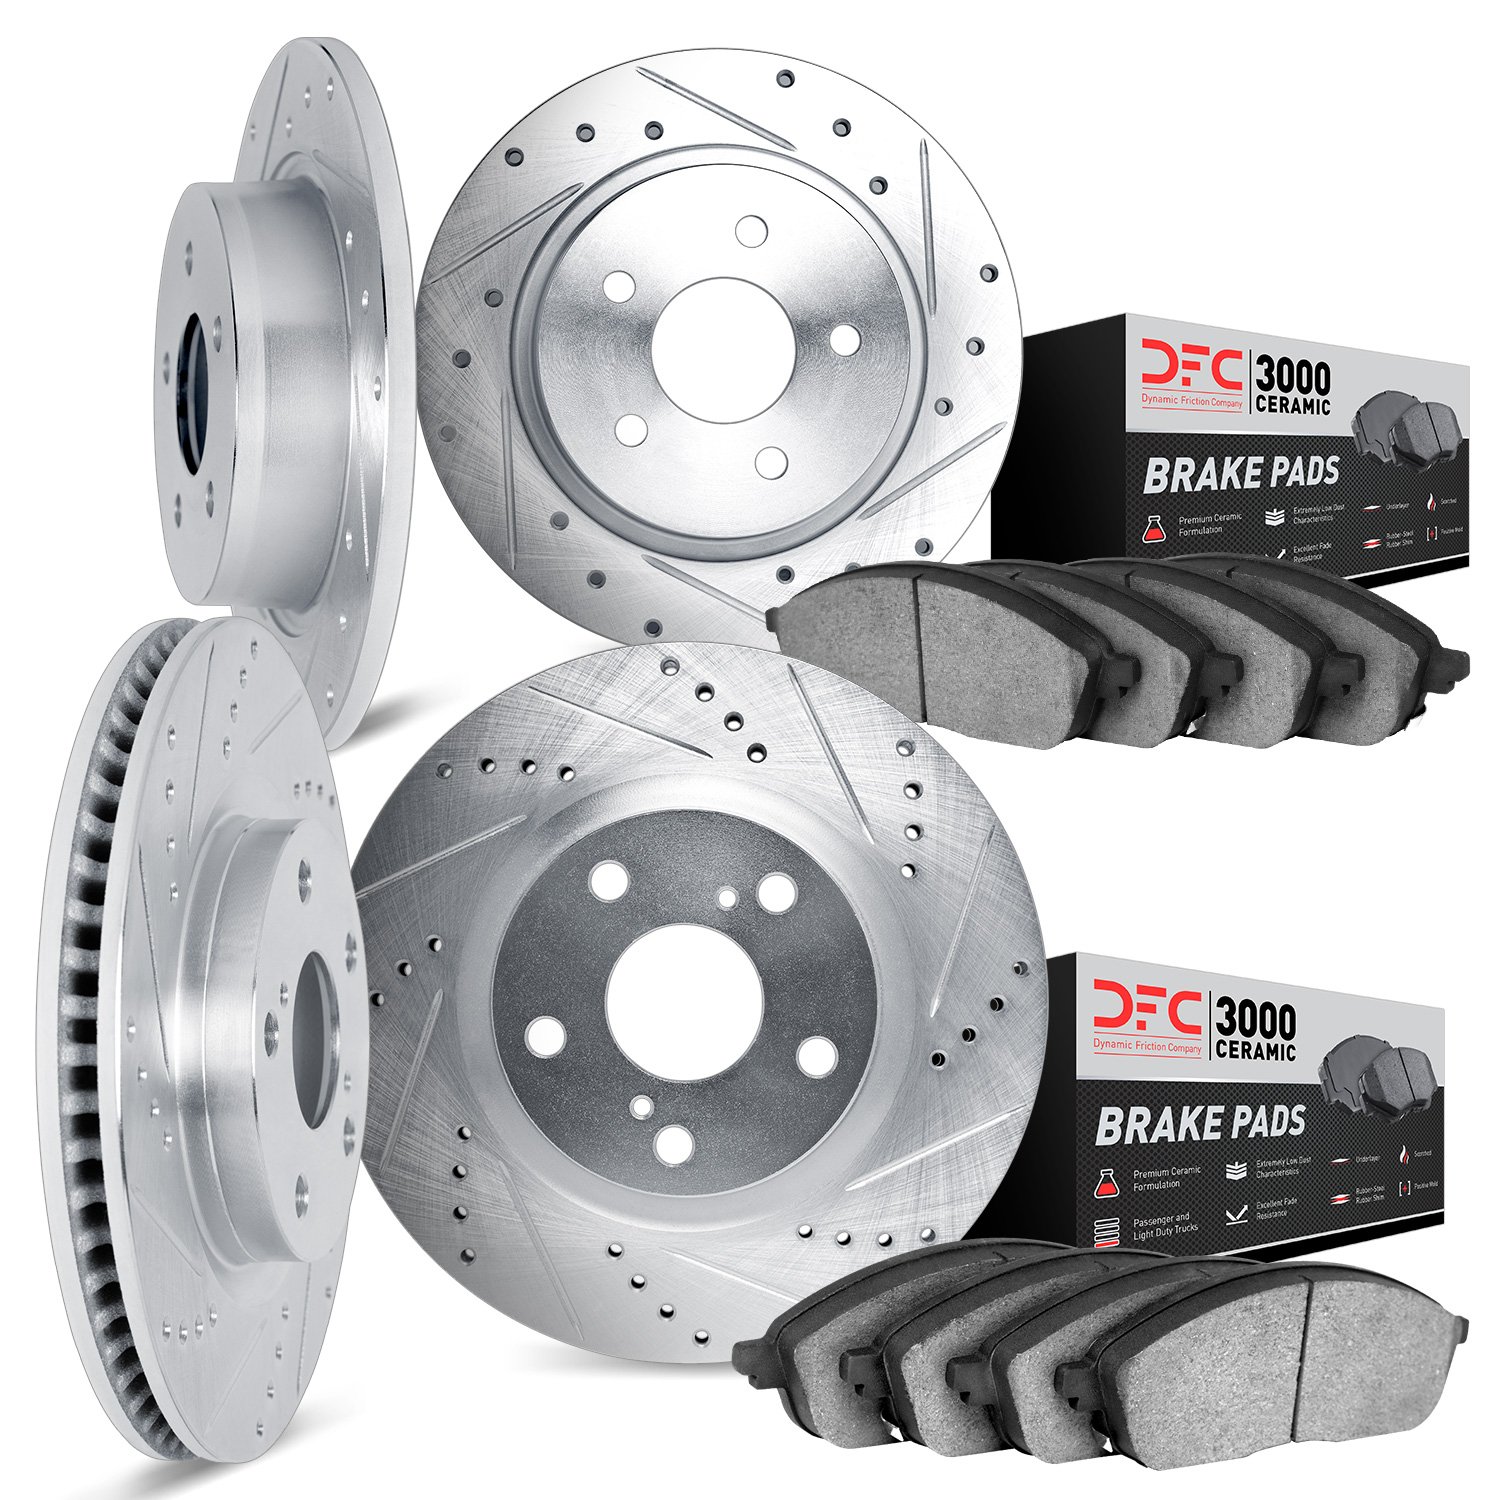 7304-76060 Drilled/Slotted Brake Rotor with 3000-Series Ceramic Brake Pads Kit [Silver], 2002-2003 Lexus/Toyota/Scion, Position: